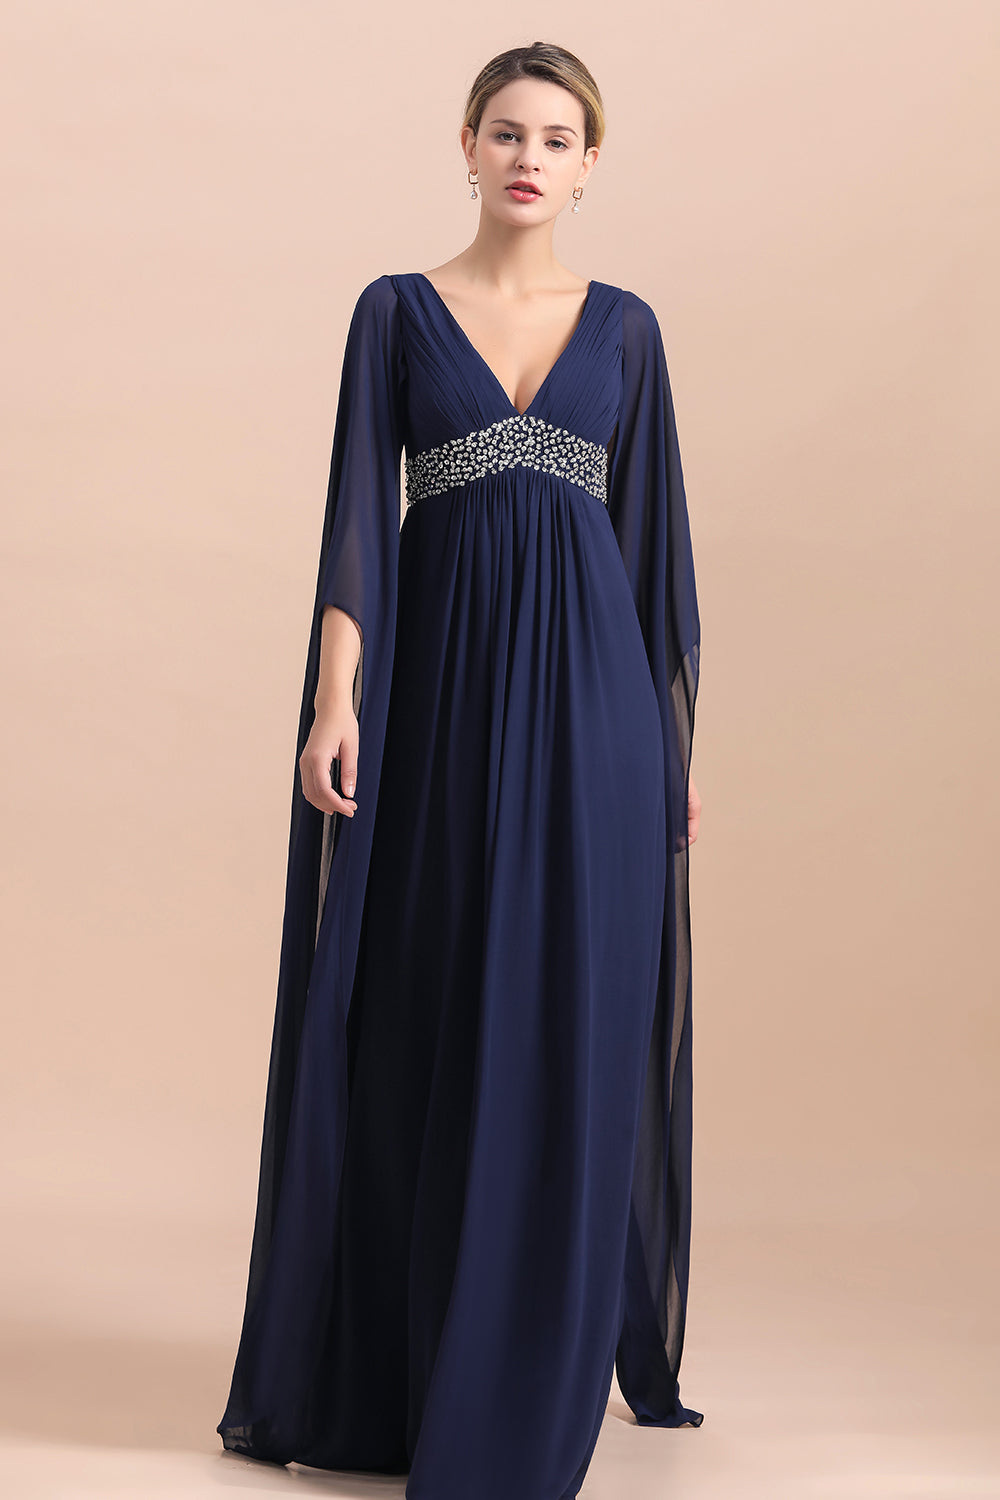 Navy Long Sleeve Chiffon Mother Of the Bride Dress With Ruffles Online